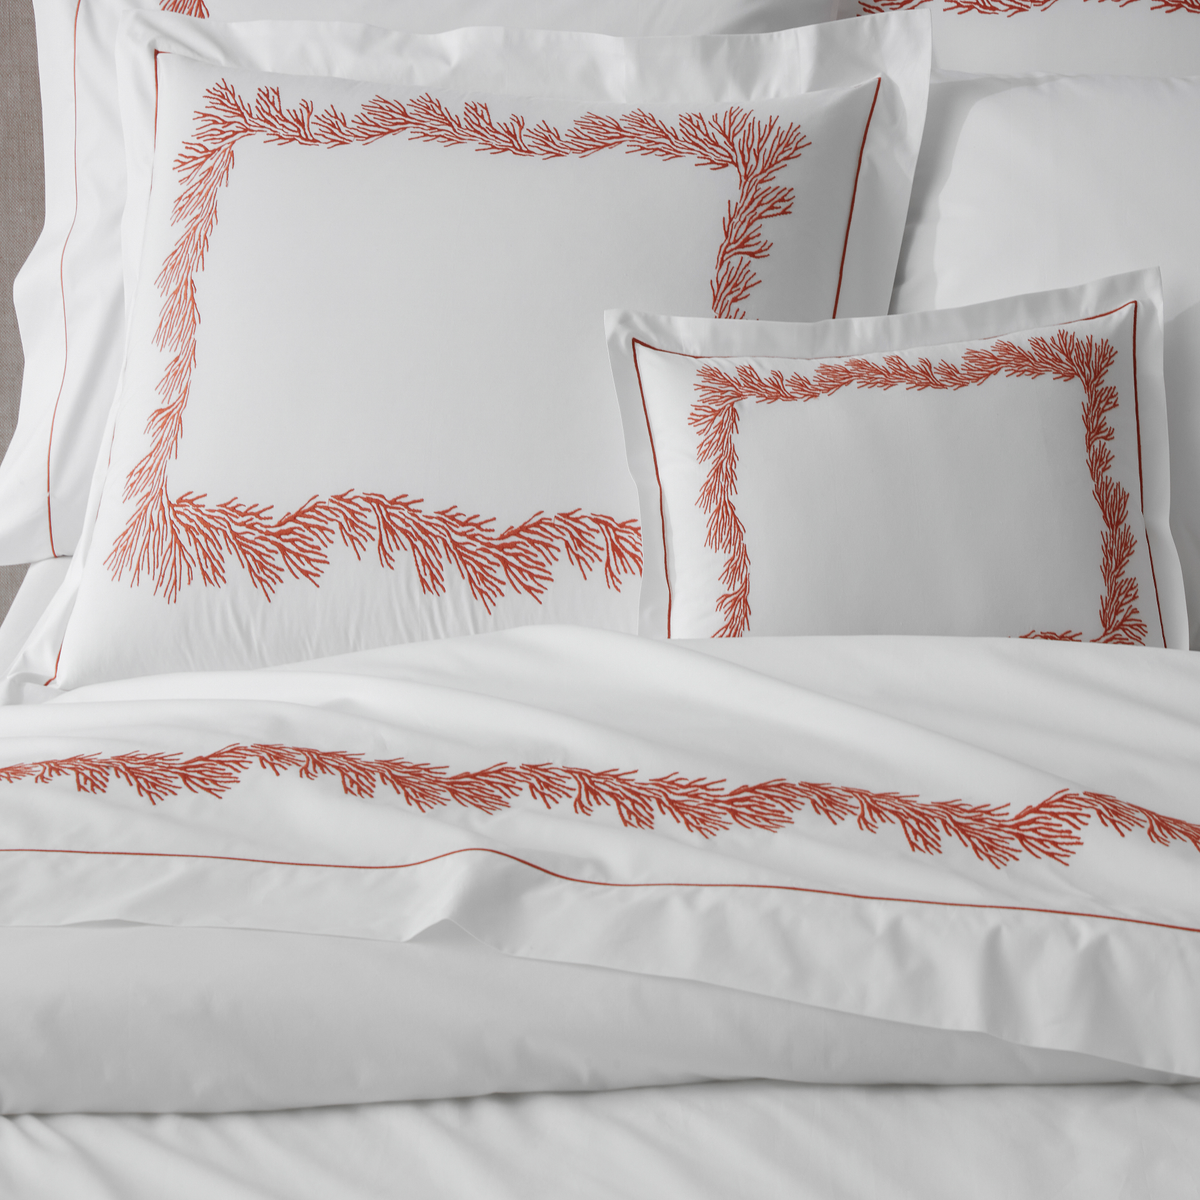 Lifestyle Detailed Image of Matouk Atoll Bedding Collection with Swatch of Hacienda